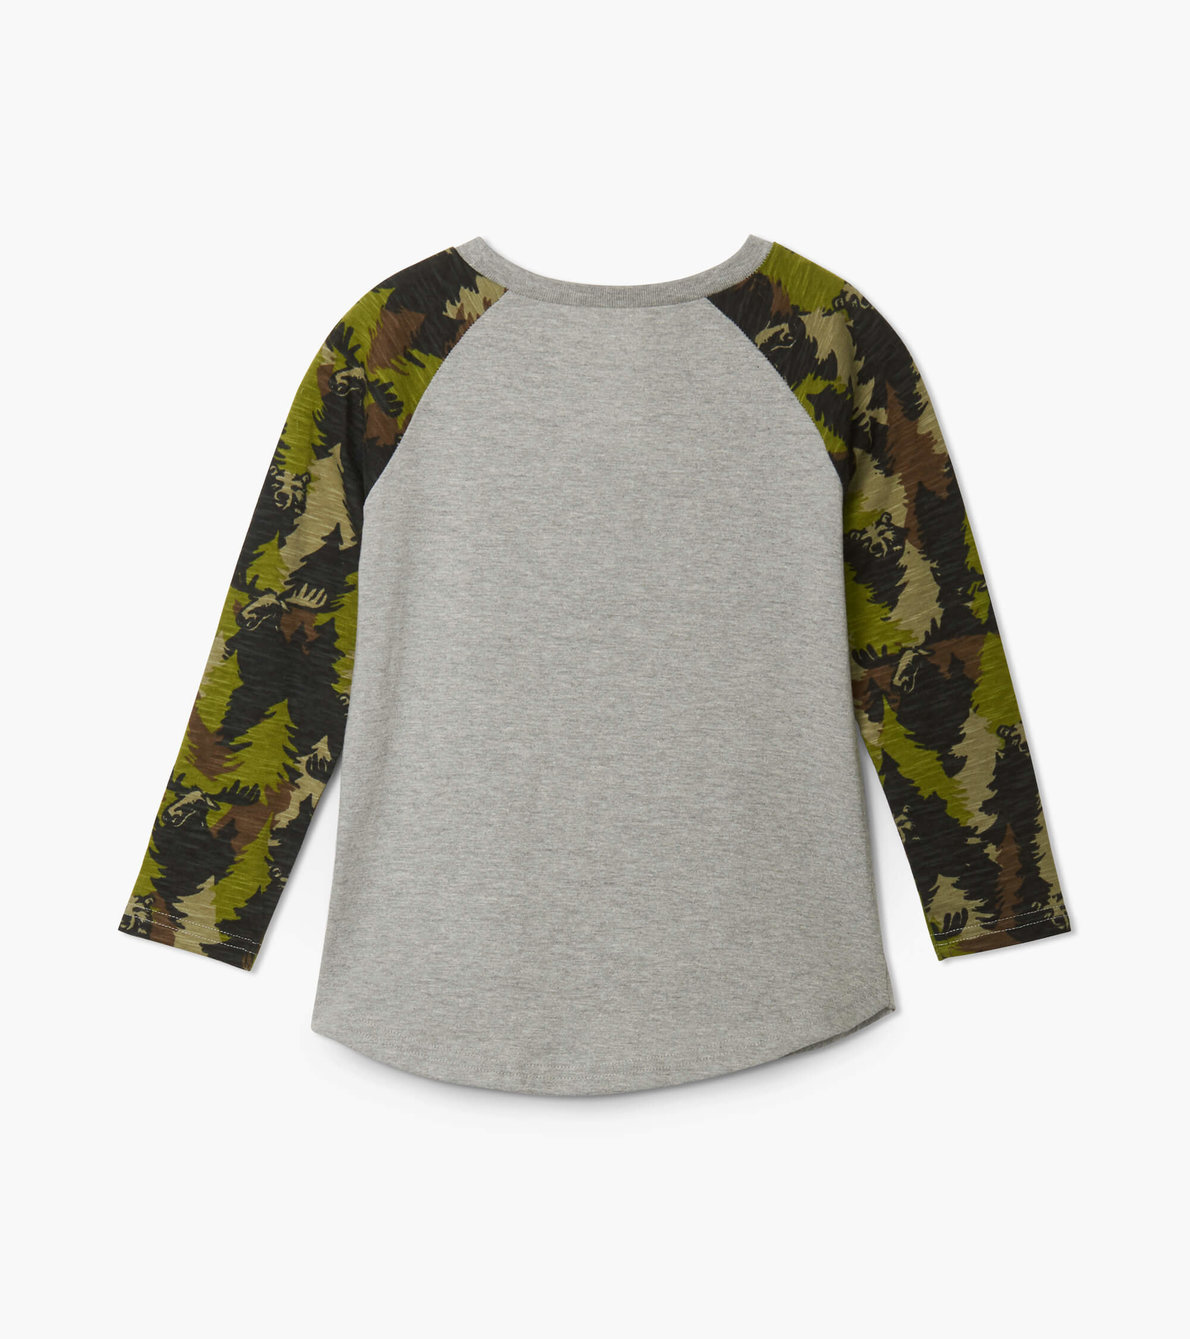 View larger image of Forest Camo Raglan Tee